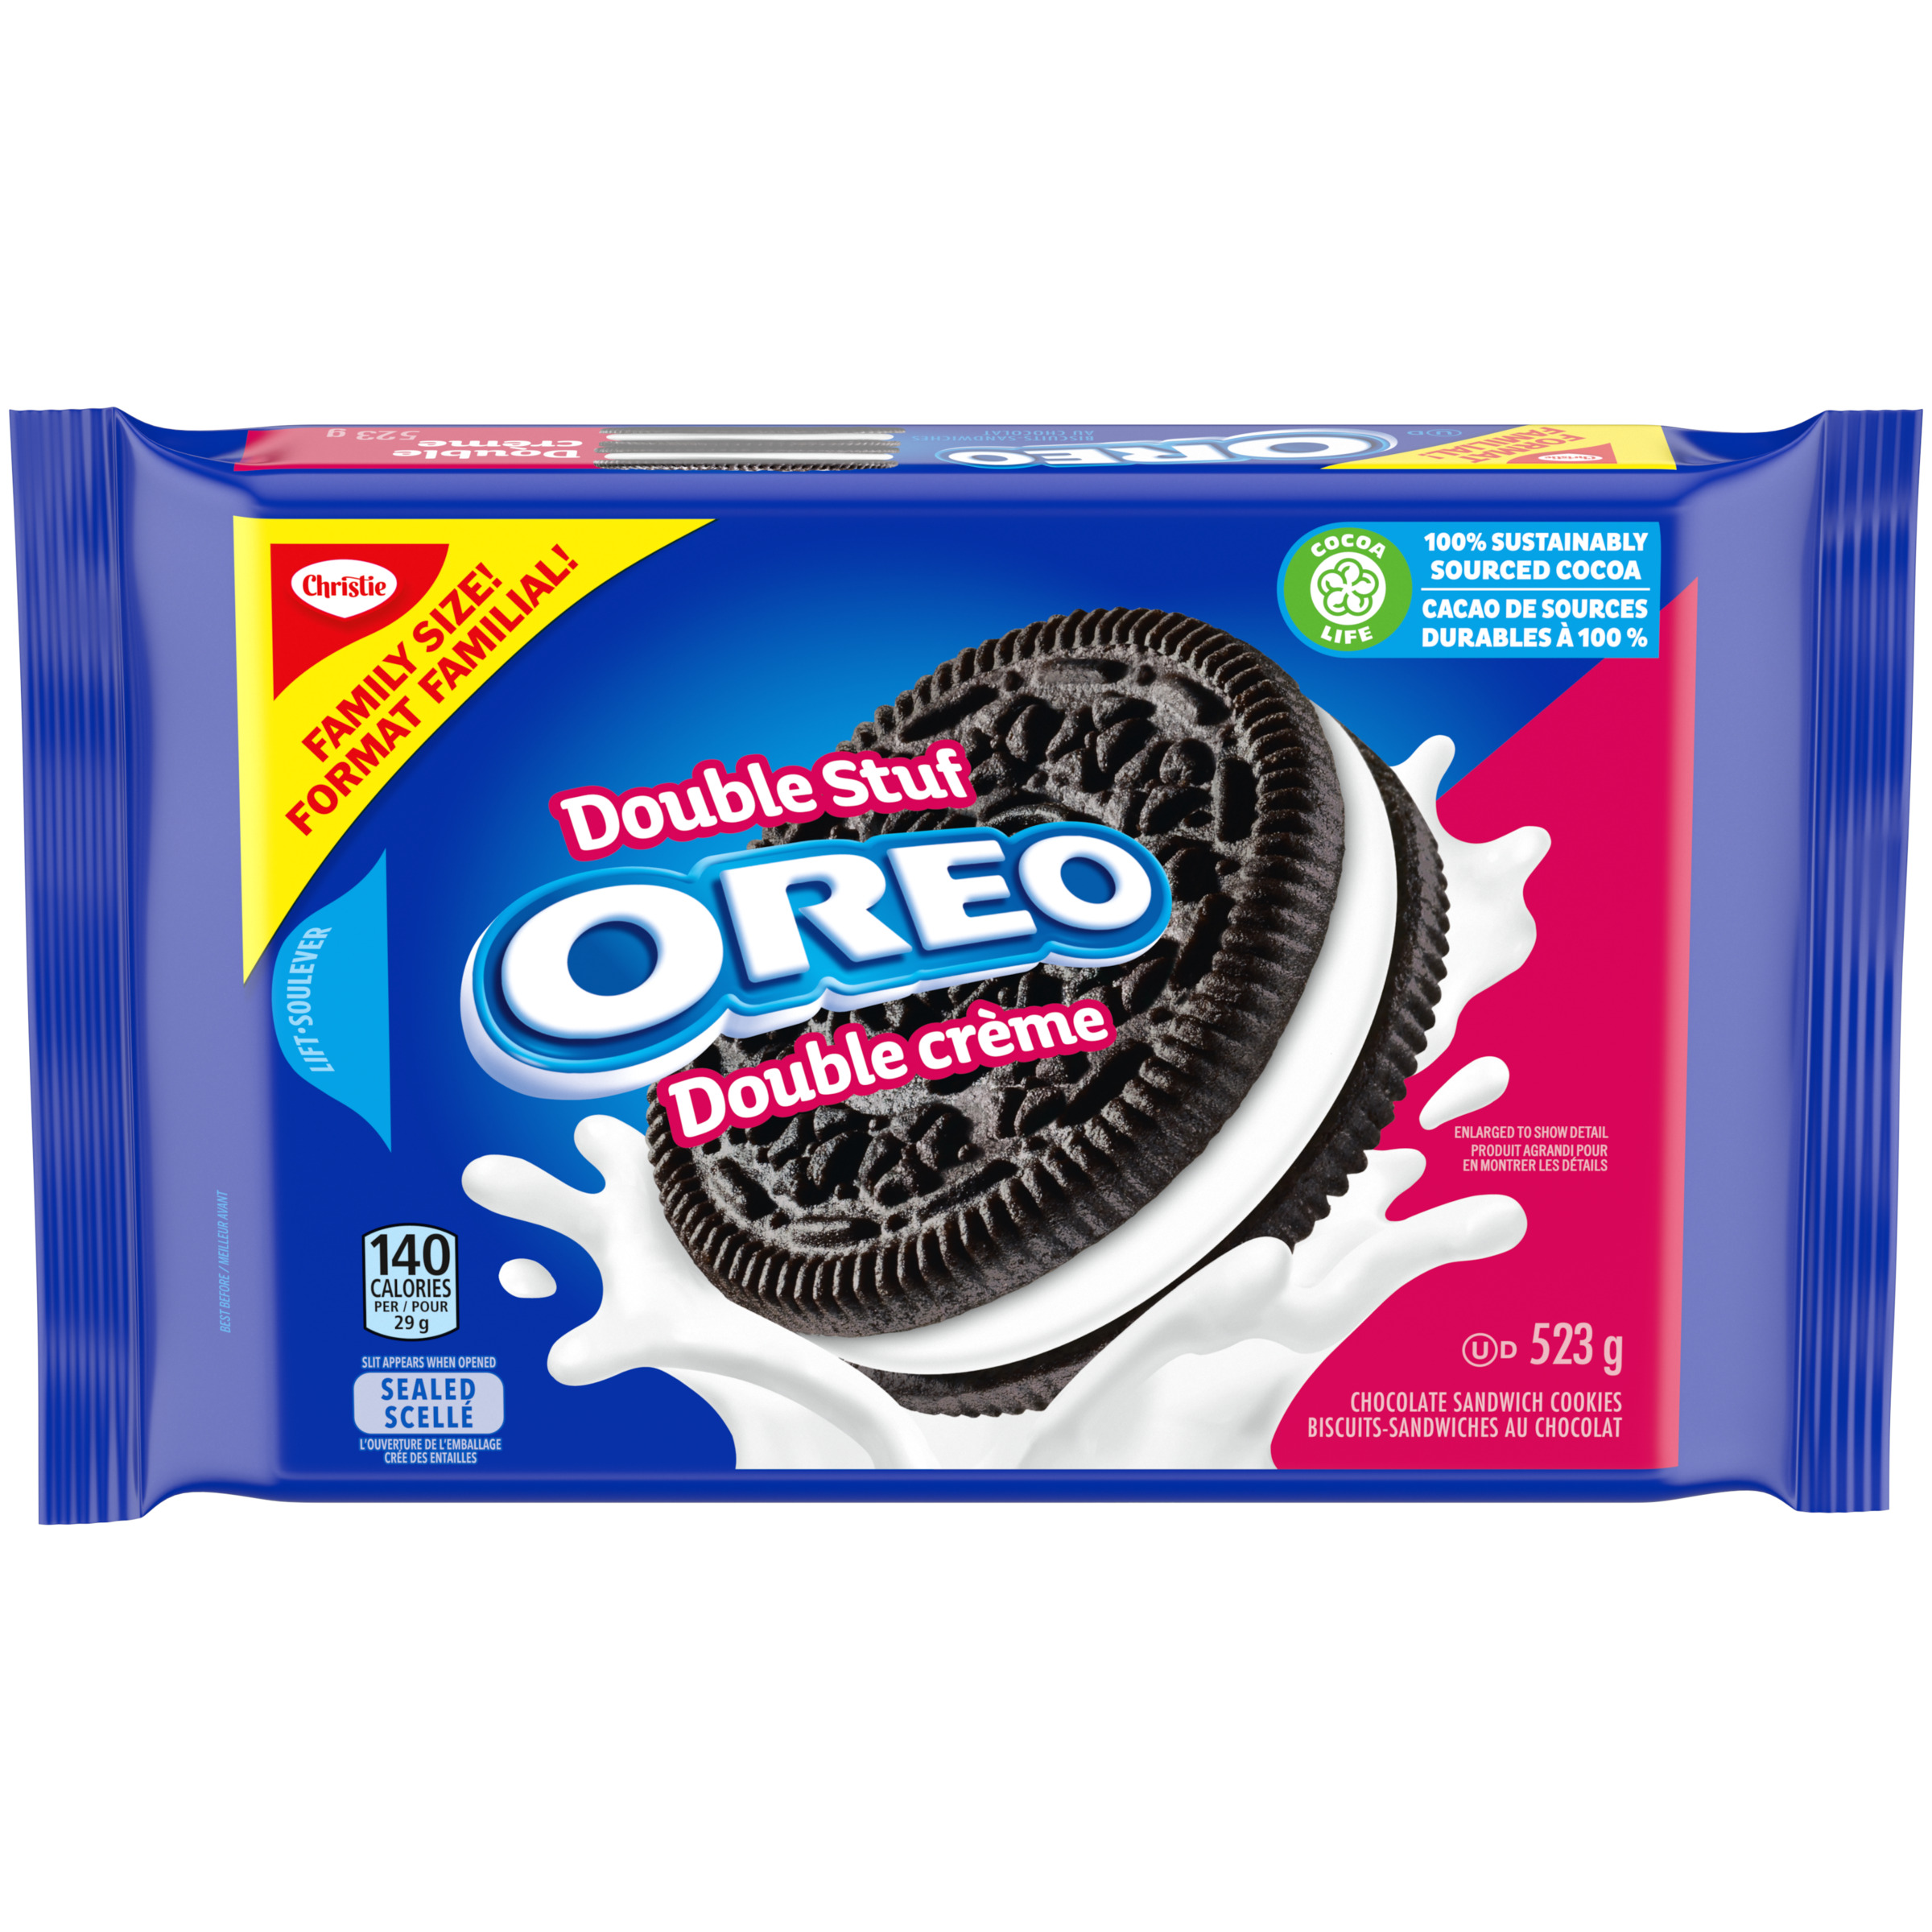 Biscuits-sandwiches OREO Double crème, 1 emballage refermable, format familial de 523 g-0